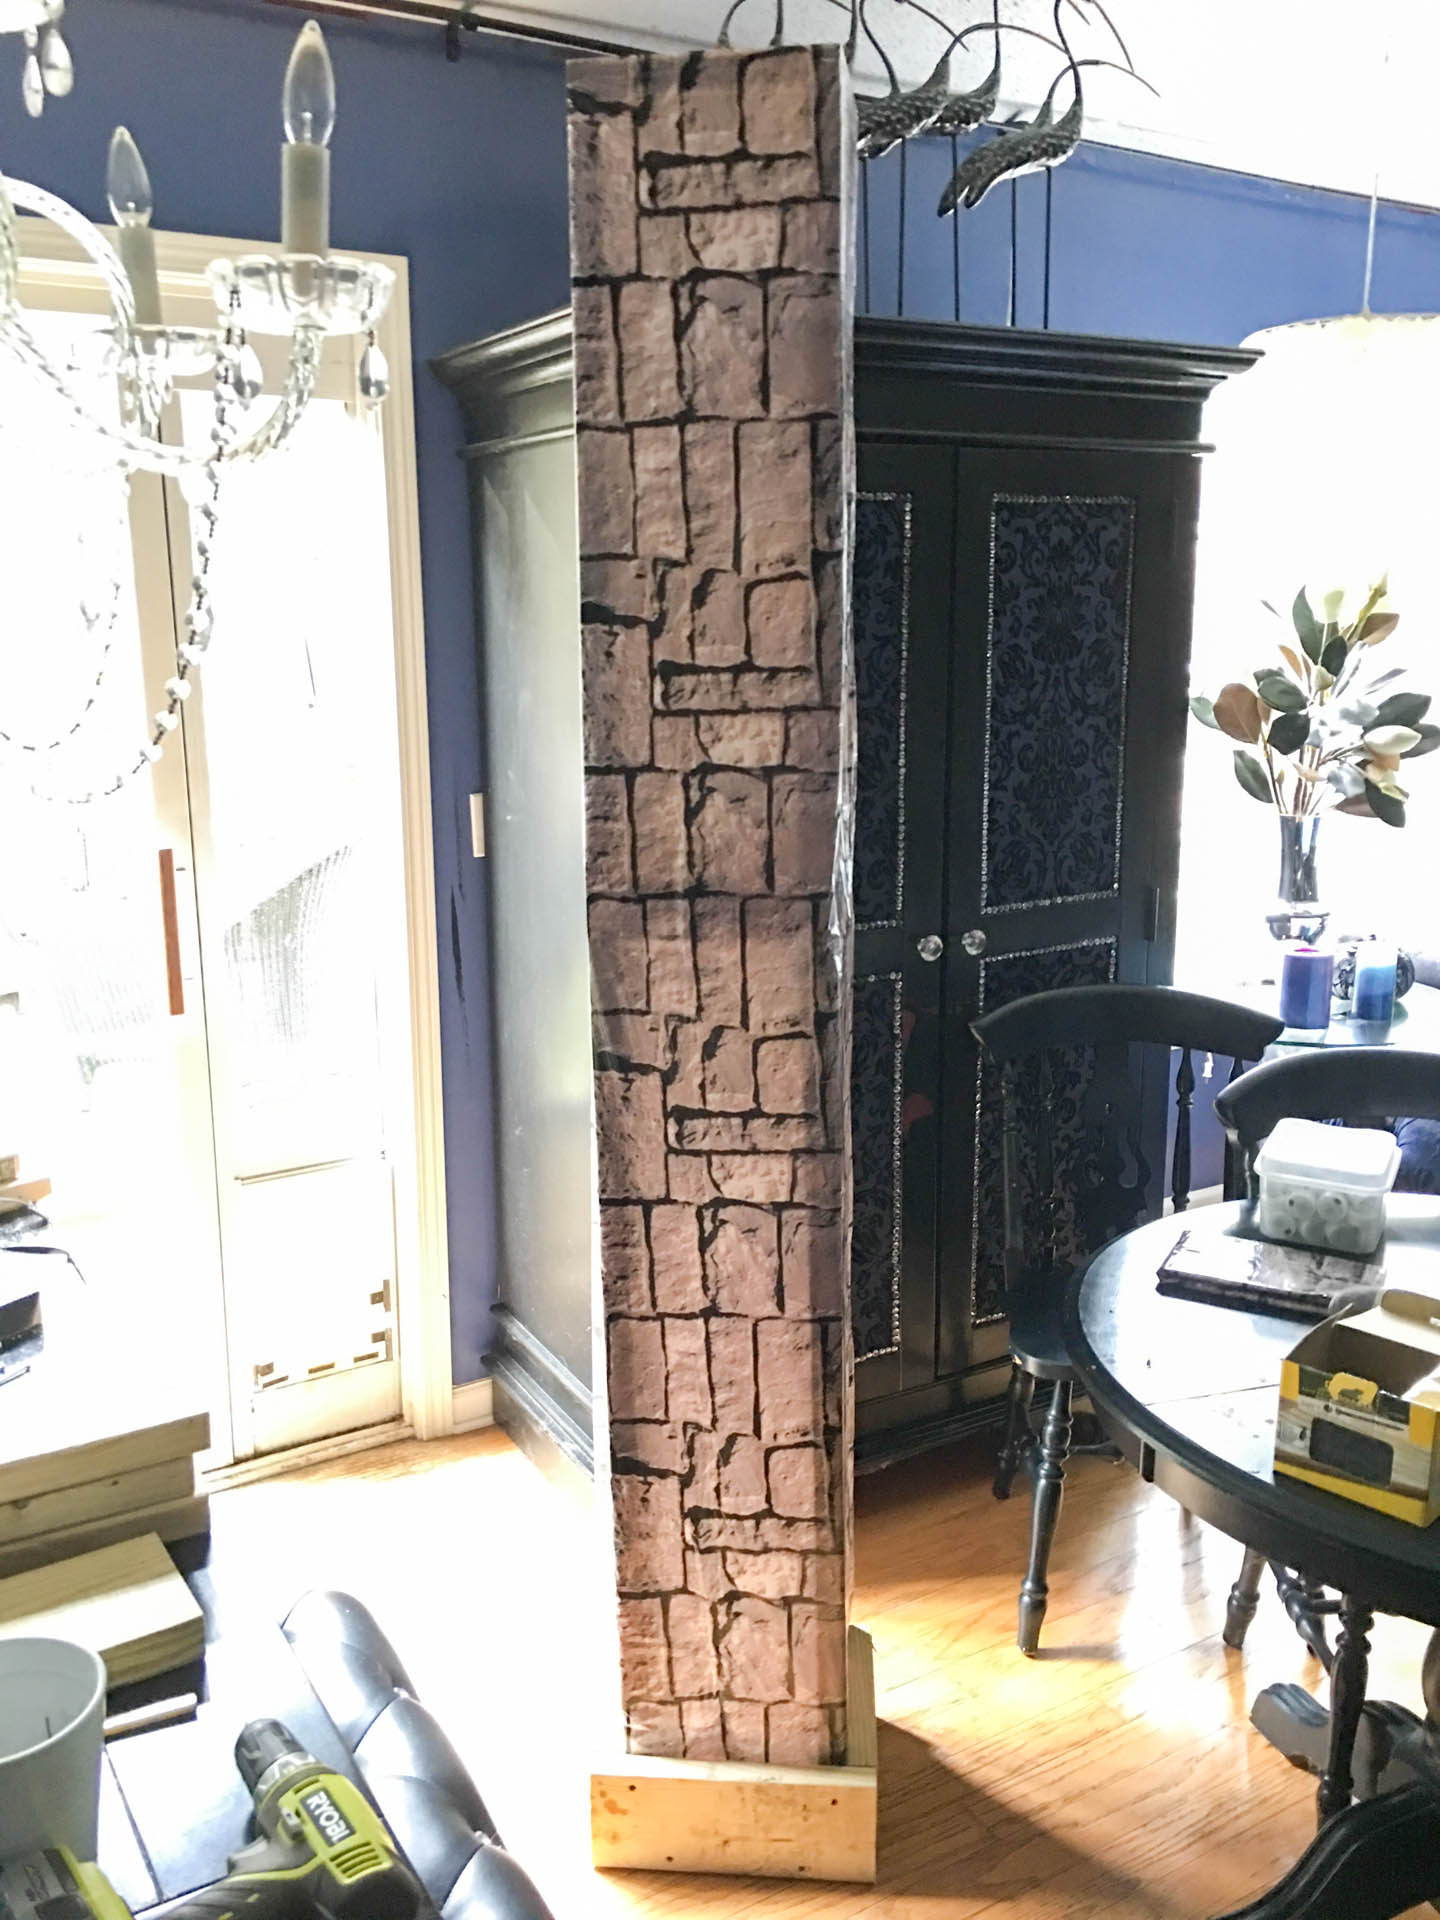 The completed DIY Halloween cemetery column